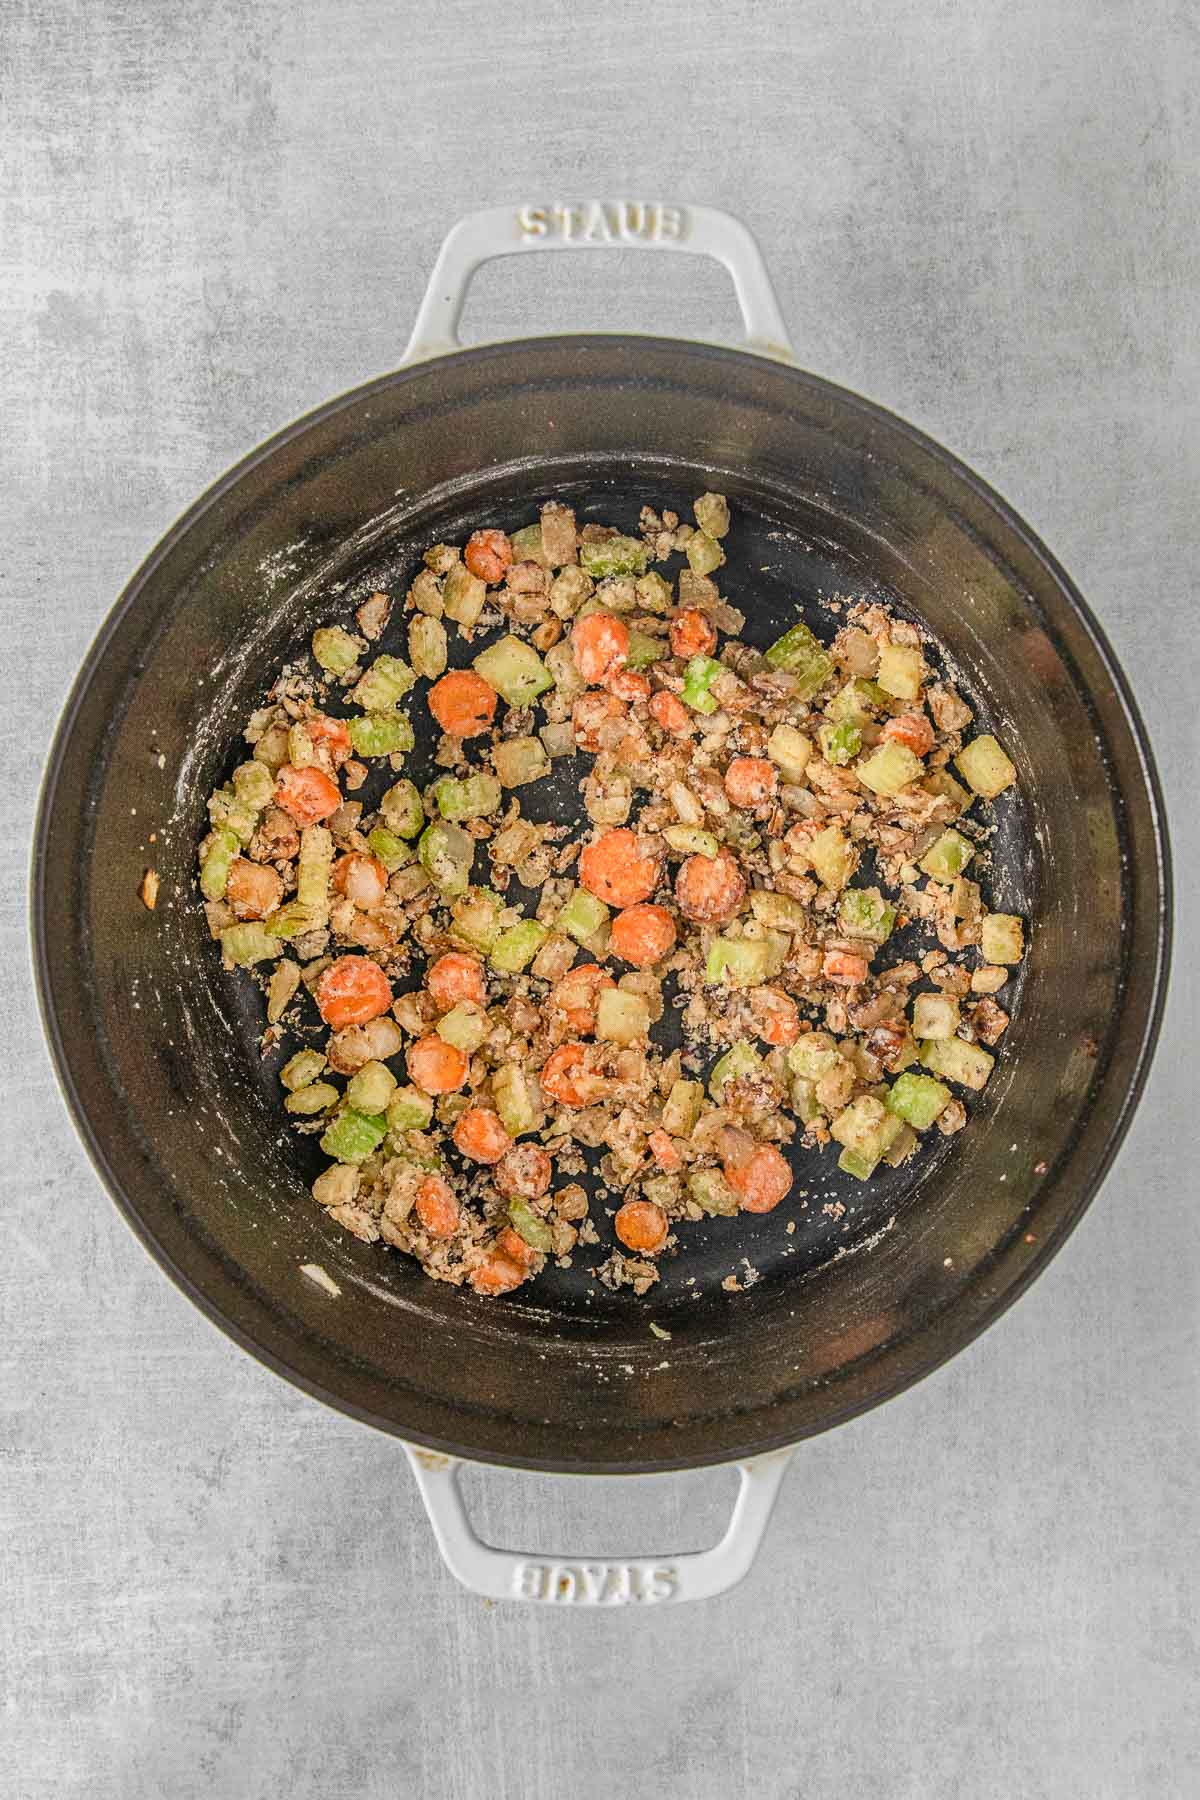 iron skillet with diced, cooked celery, carrots and onions.